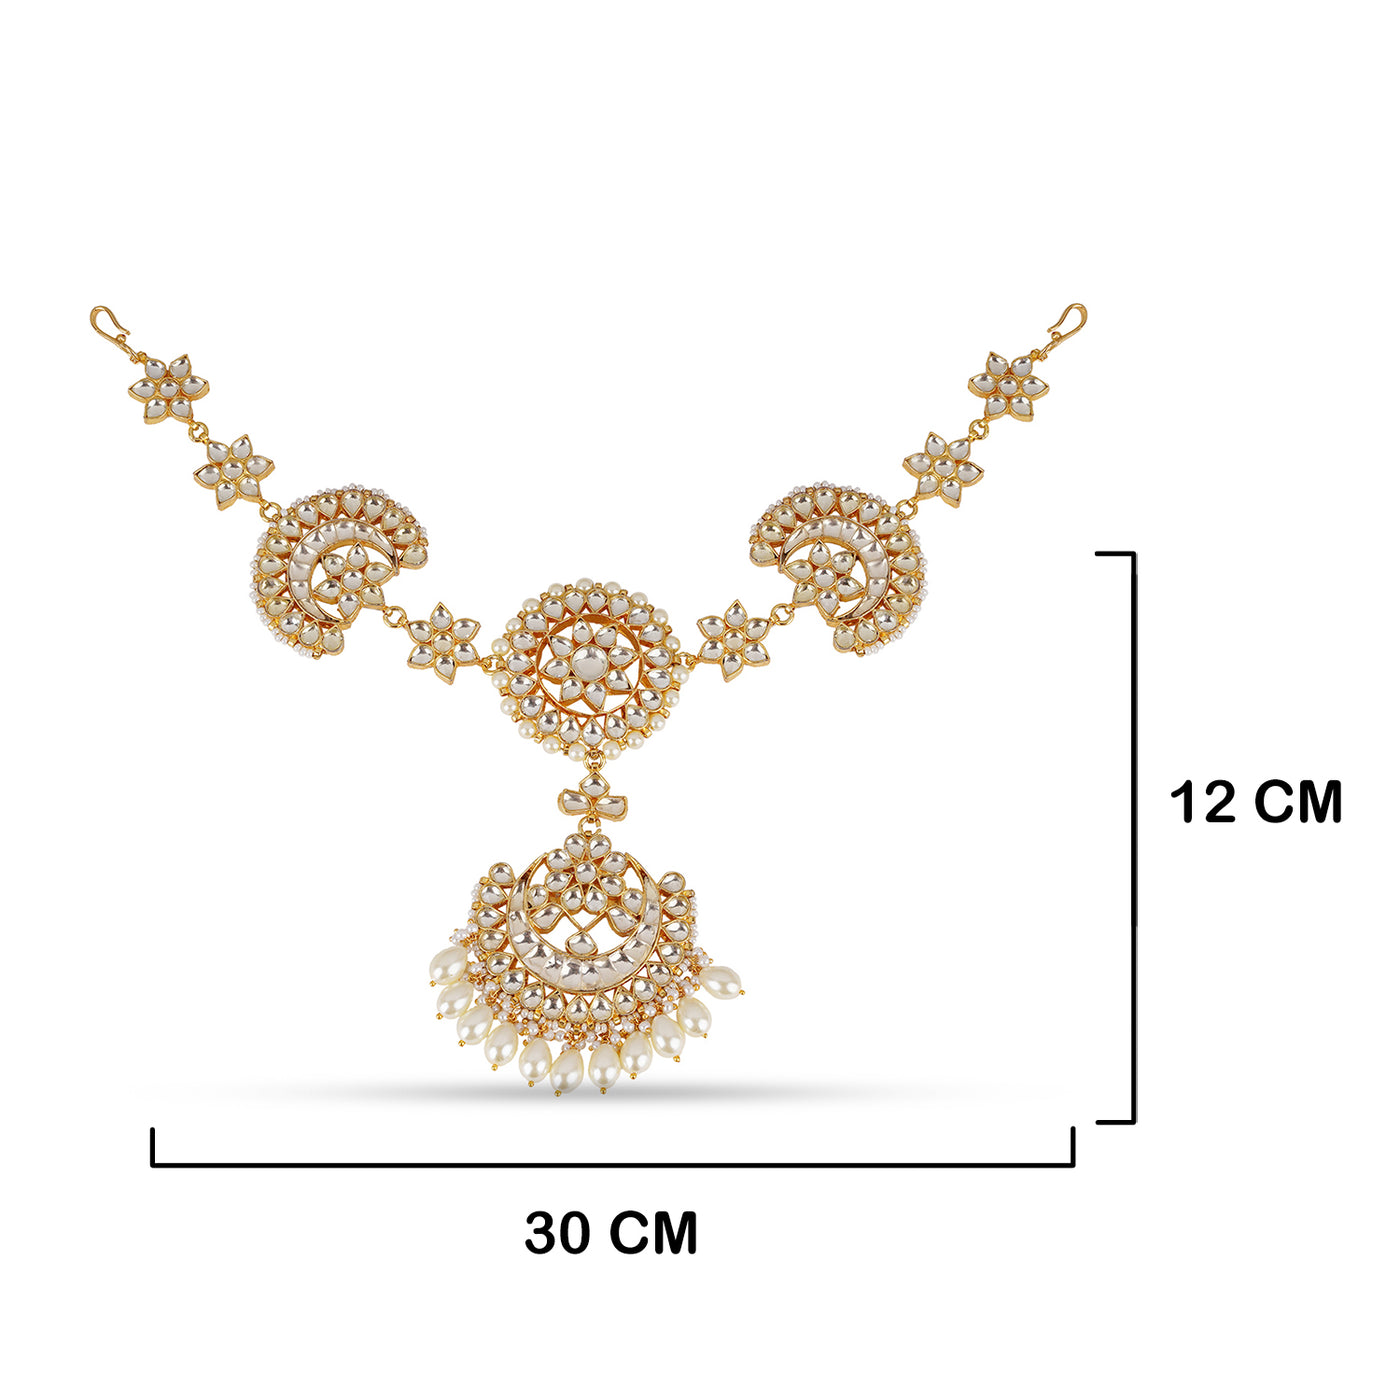  Seed Pearl Kundan Mathapatti with measurements in cm. 30cm by 12cm.